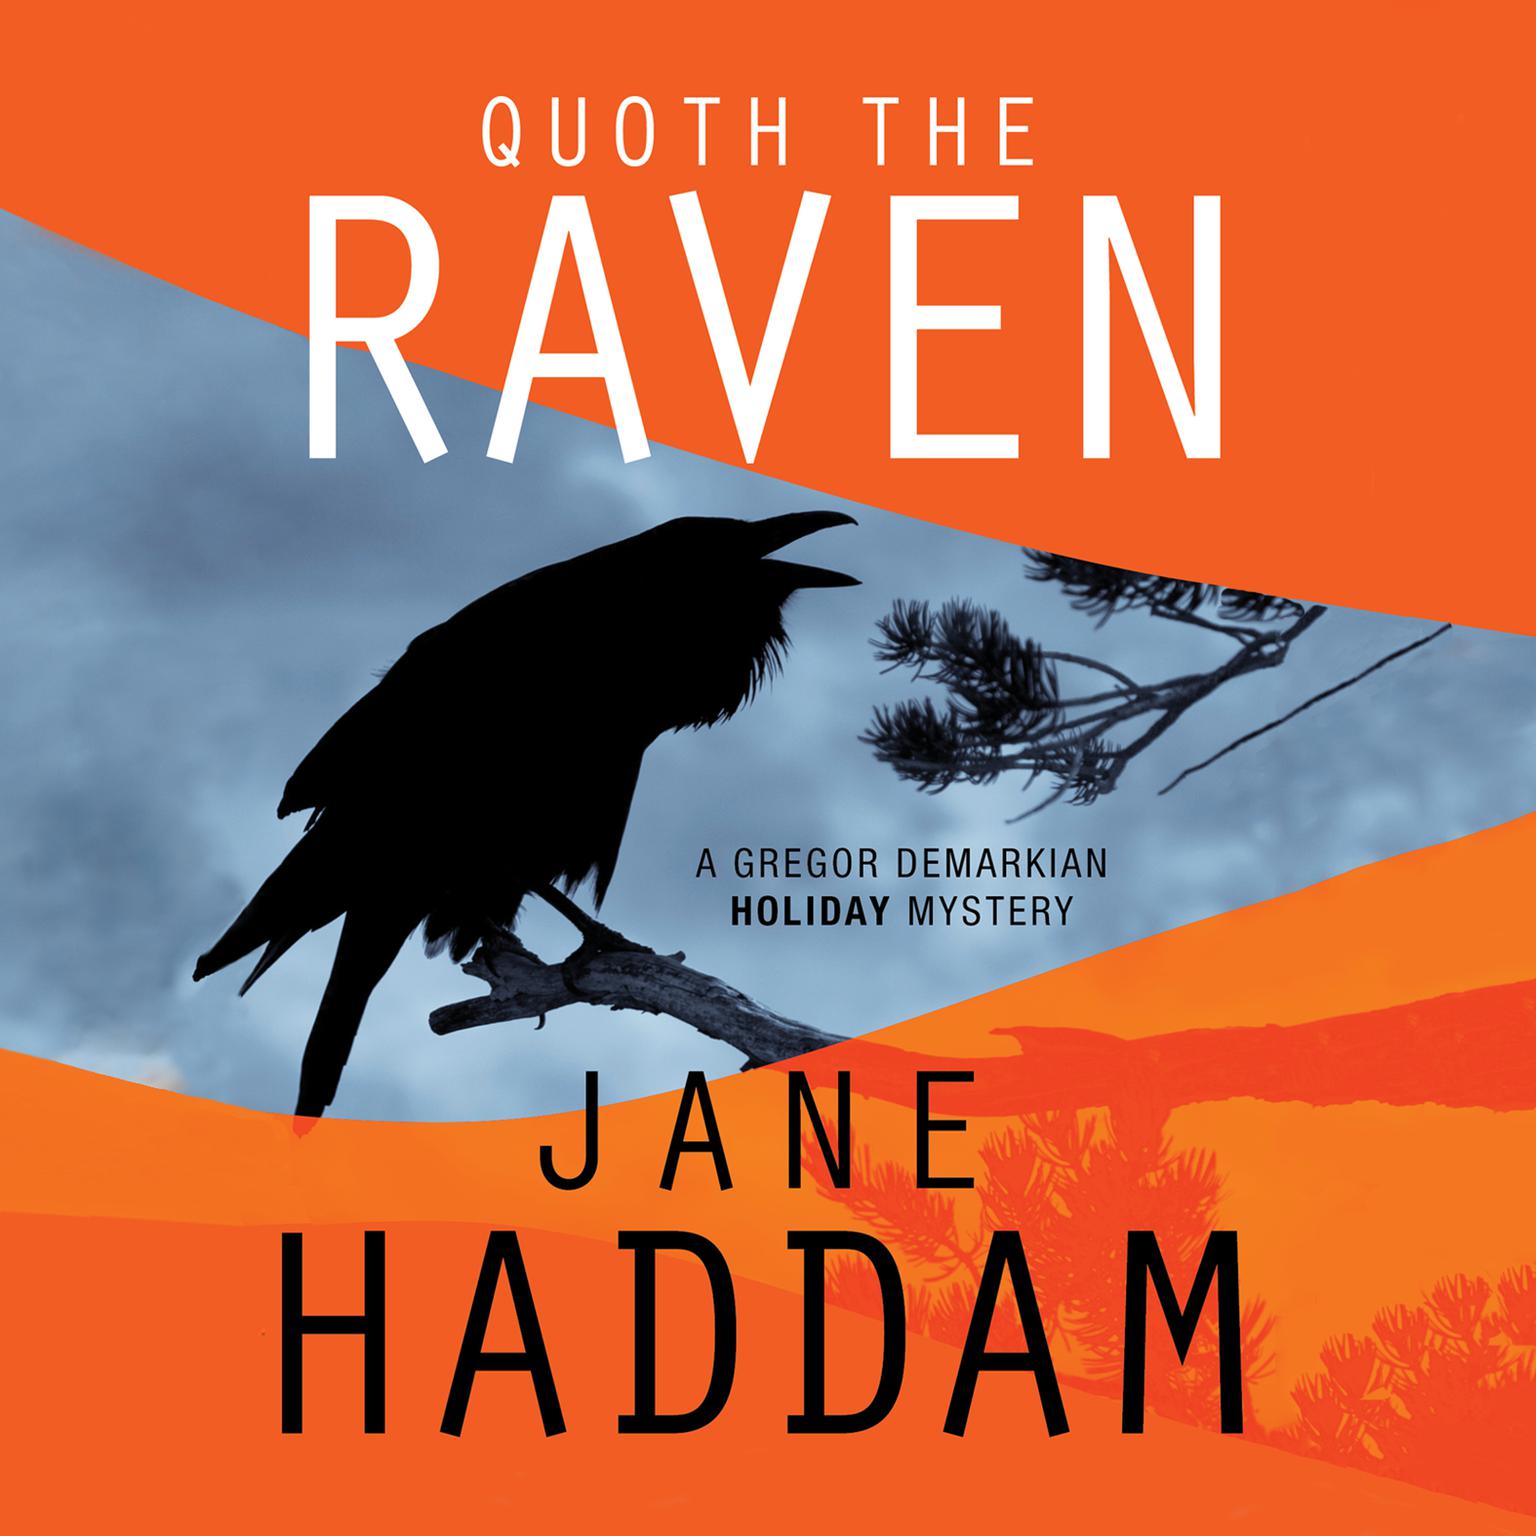 Quoth the Raven Audiobook, by Jane Haddam